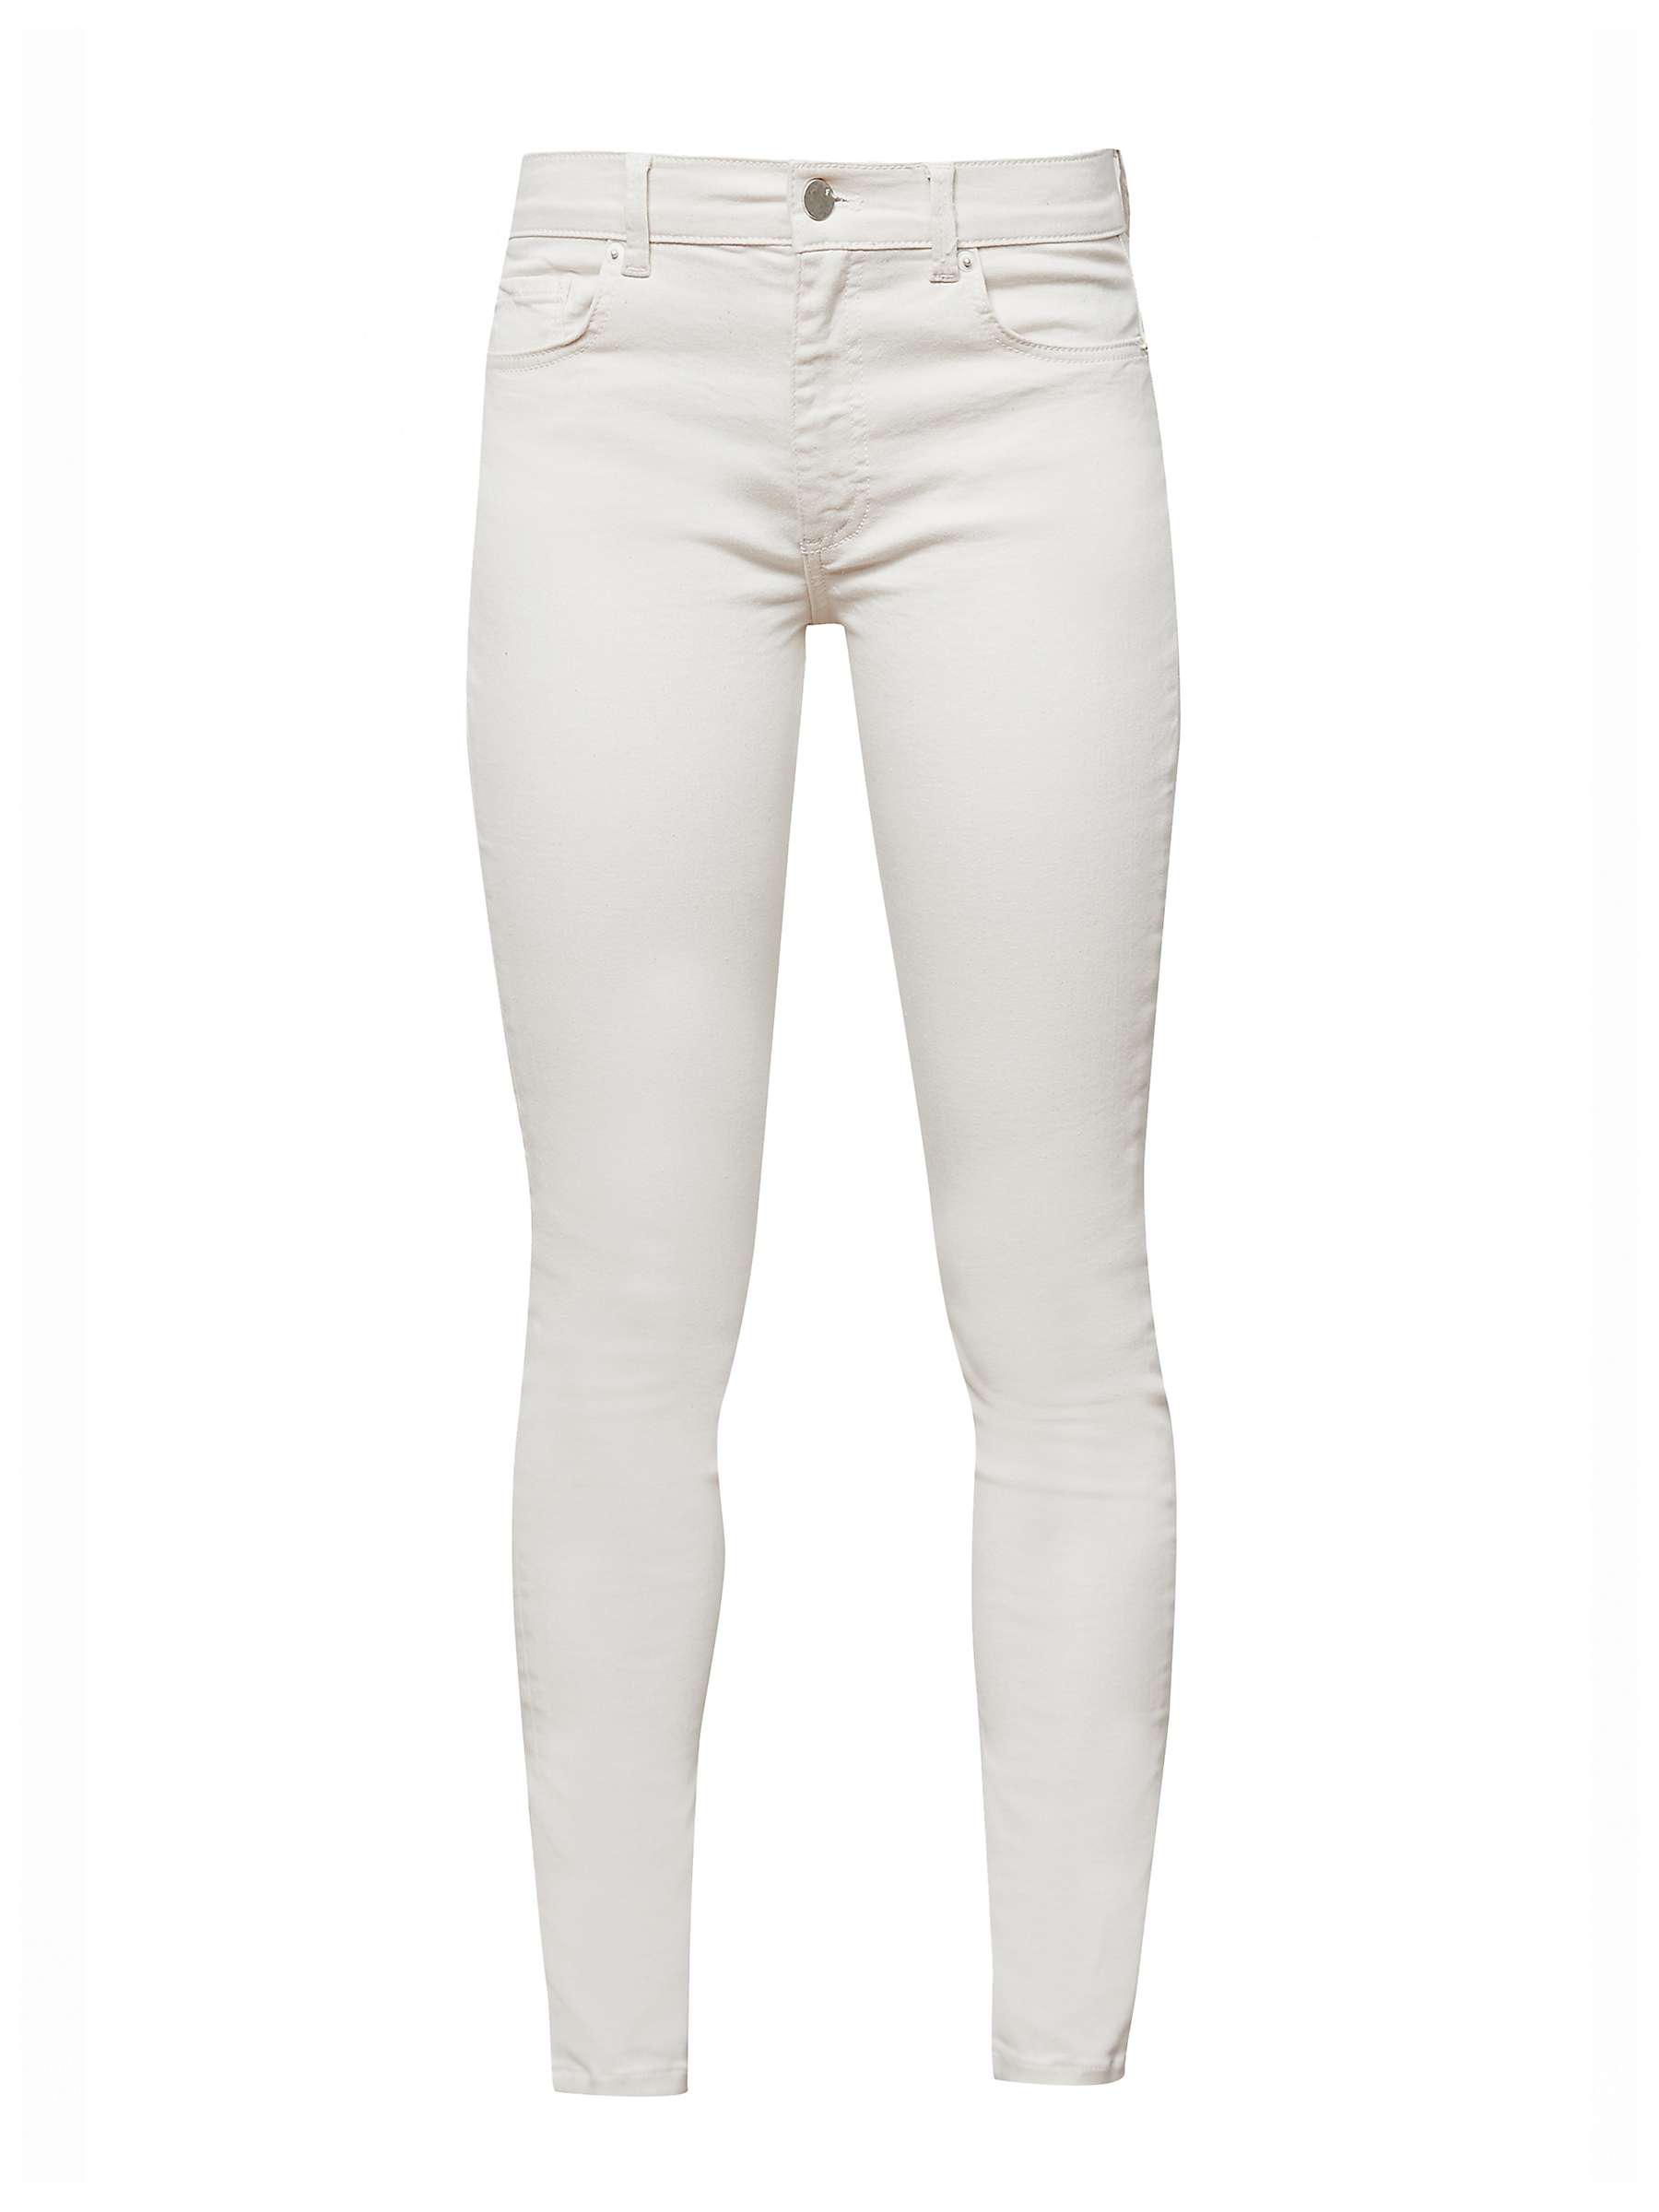 Buy French Connection Rebound Skinny Jeans, Ecru Online at johnlewis.com